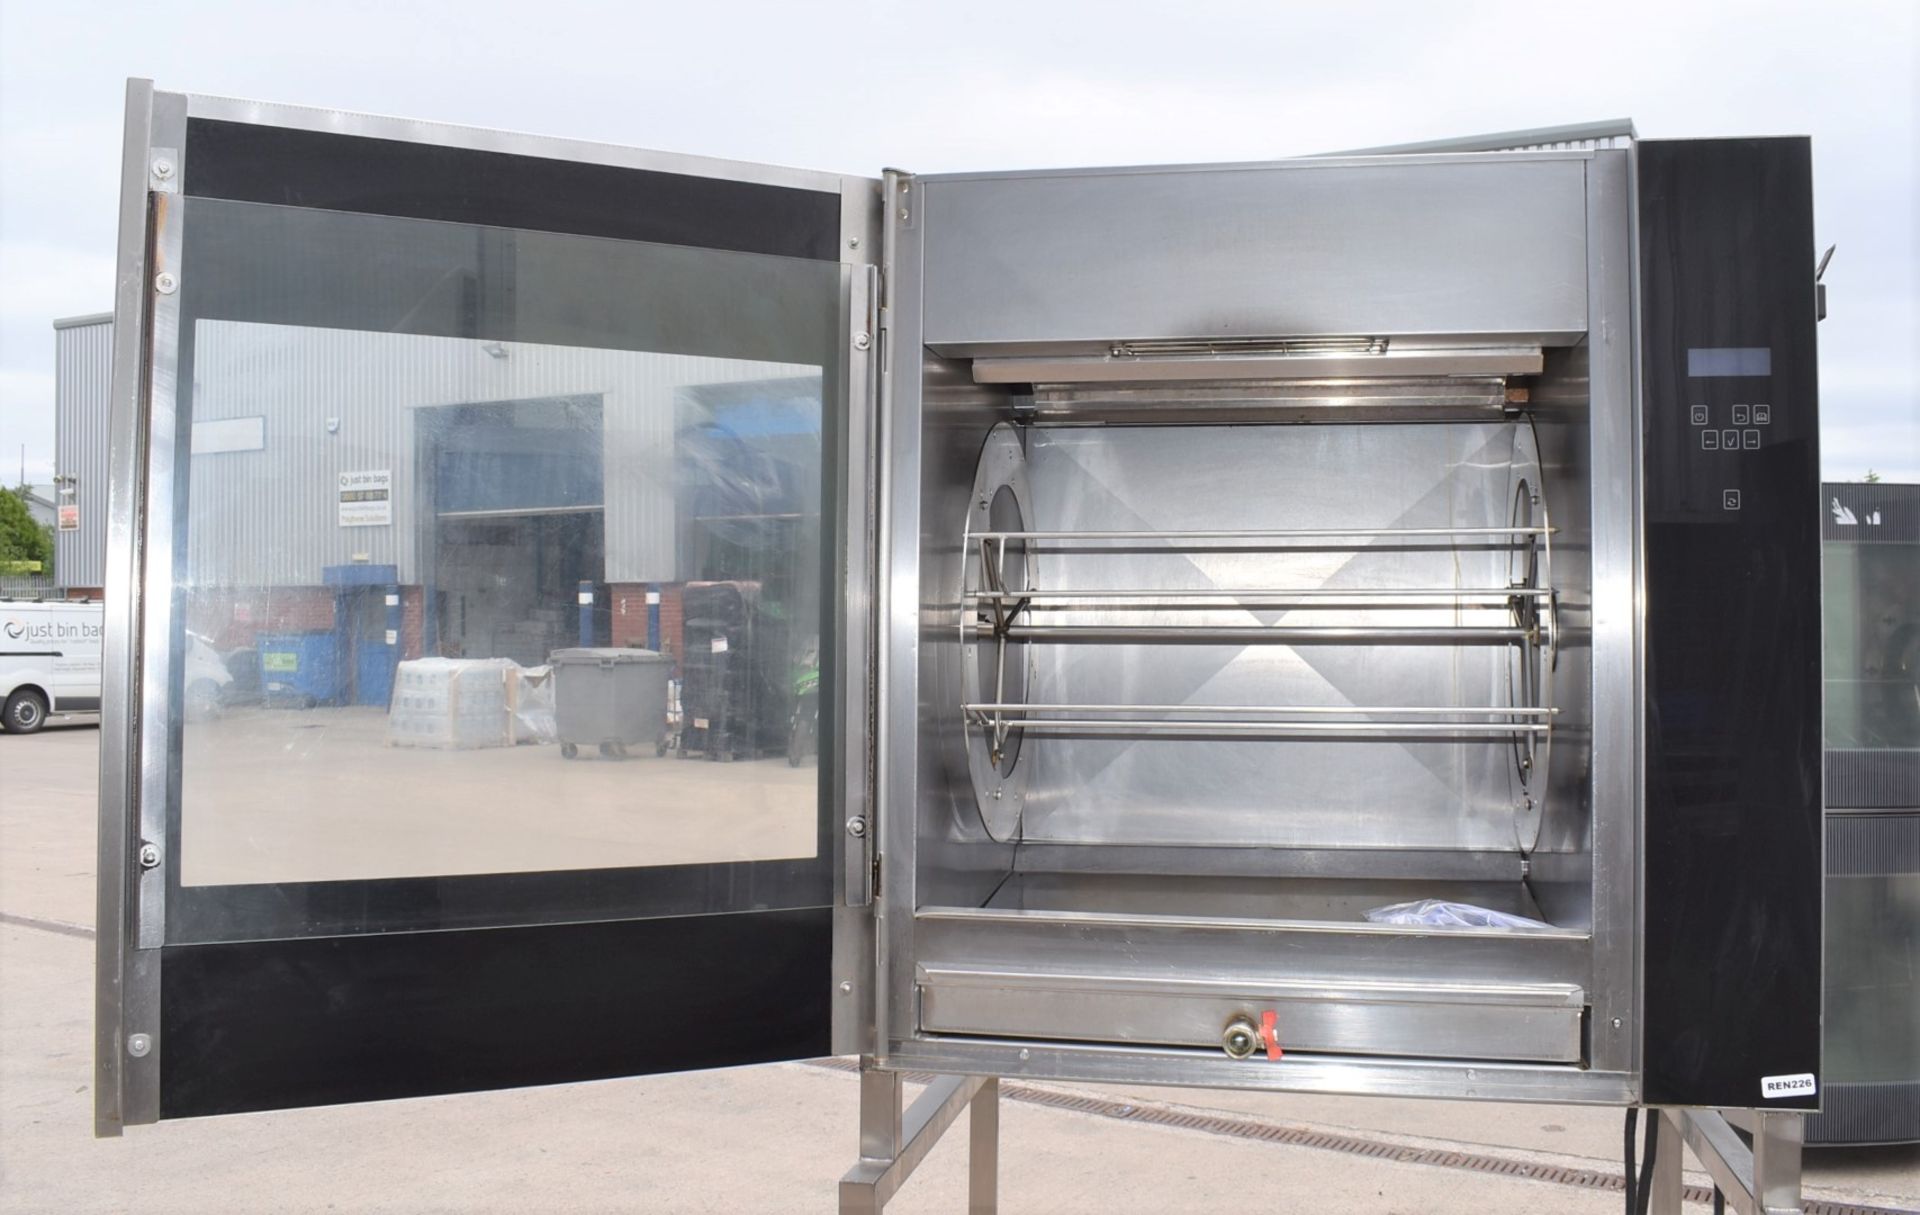 1 x Frijado Chicken Rotisserie Programmable Oven With Stand - 3 Phase - Model: TDR 8P - RRP £10,764 - Image 5 of 21